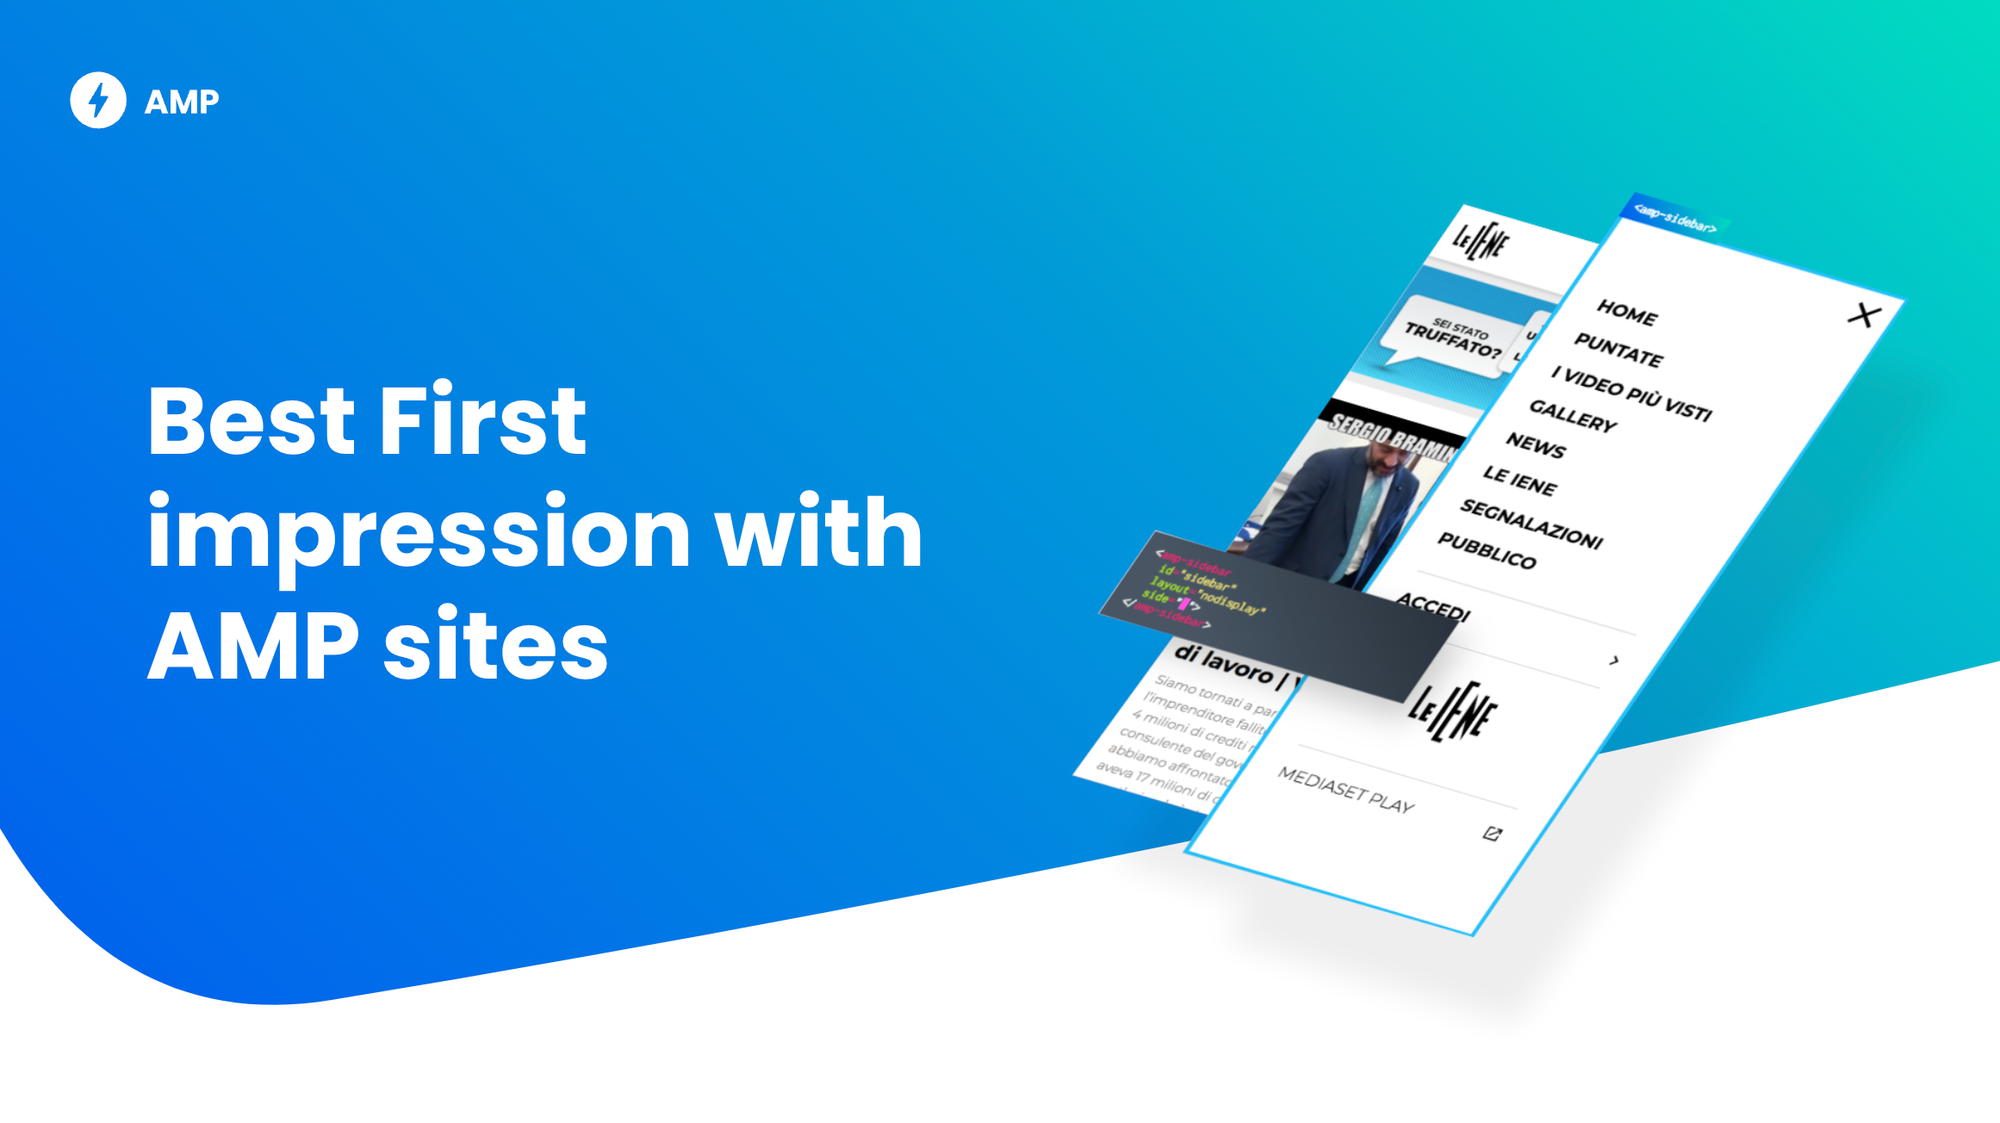 Best first impression with AMP sites 